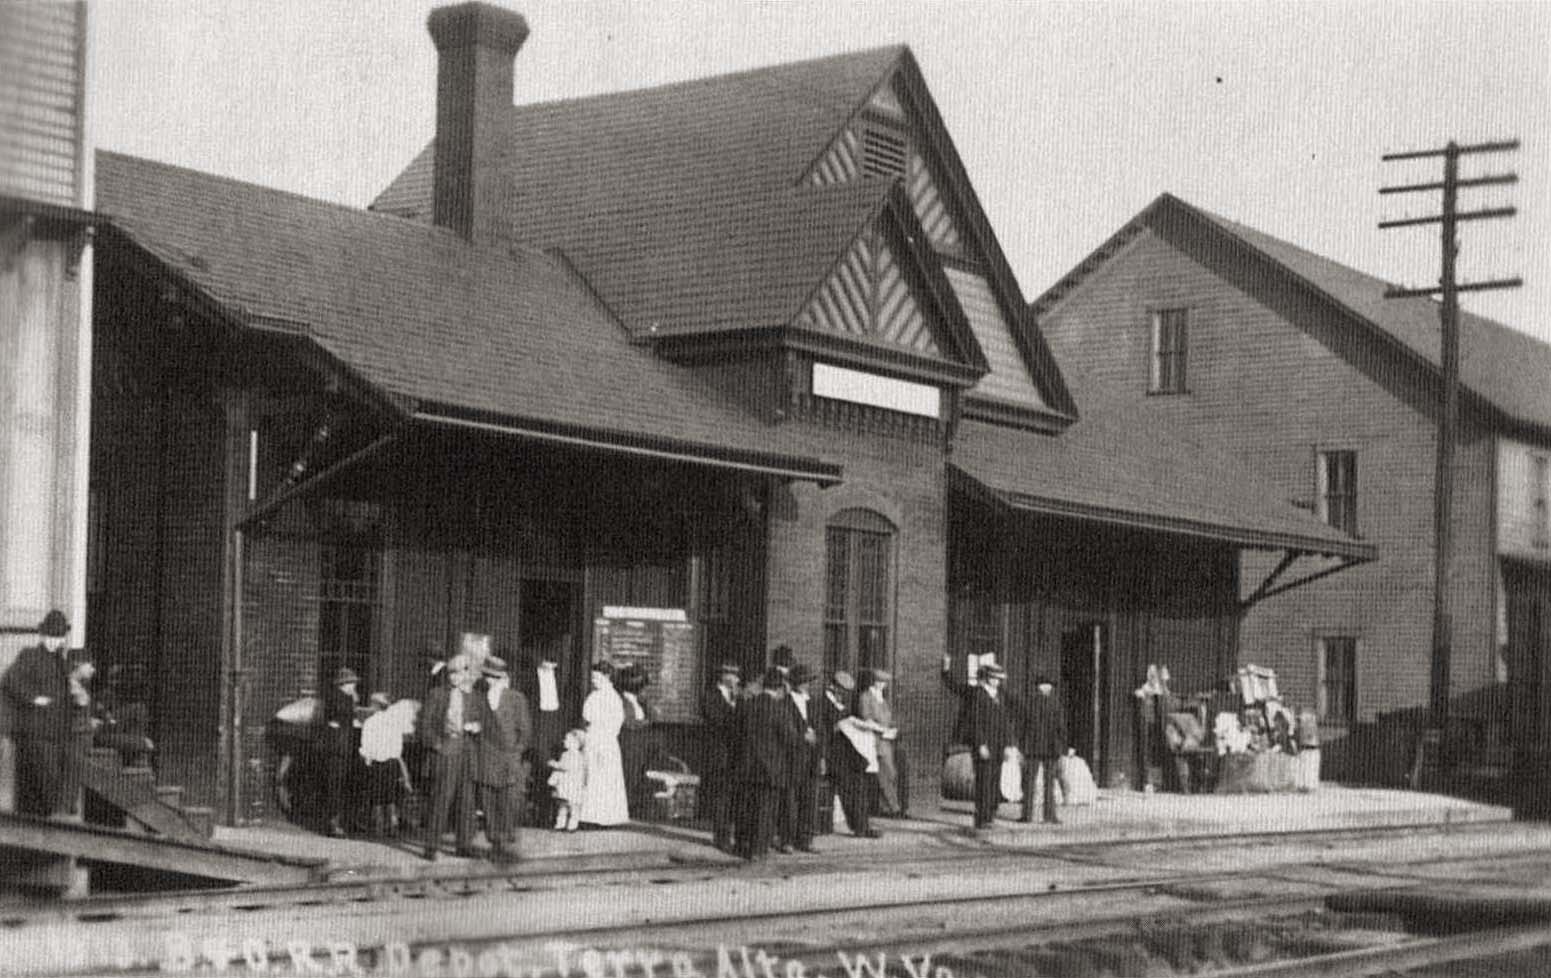 Terra Alta Train Depot in West Virginia. Built and completed in 1883 this depot was used for both Passengers and Freight by the B & O Railroad. Photo taken circa 1910